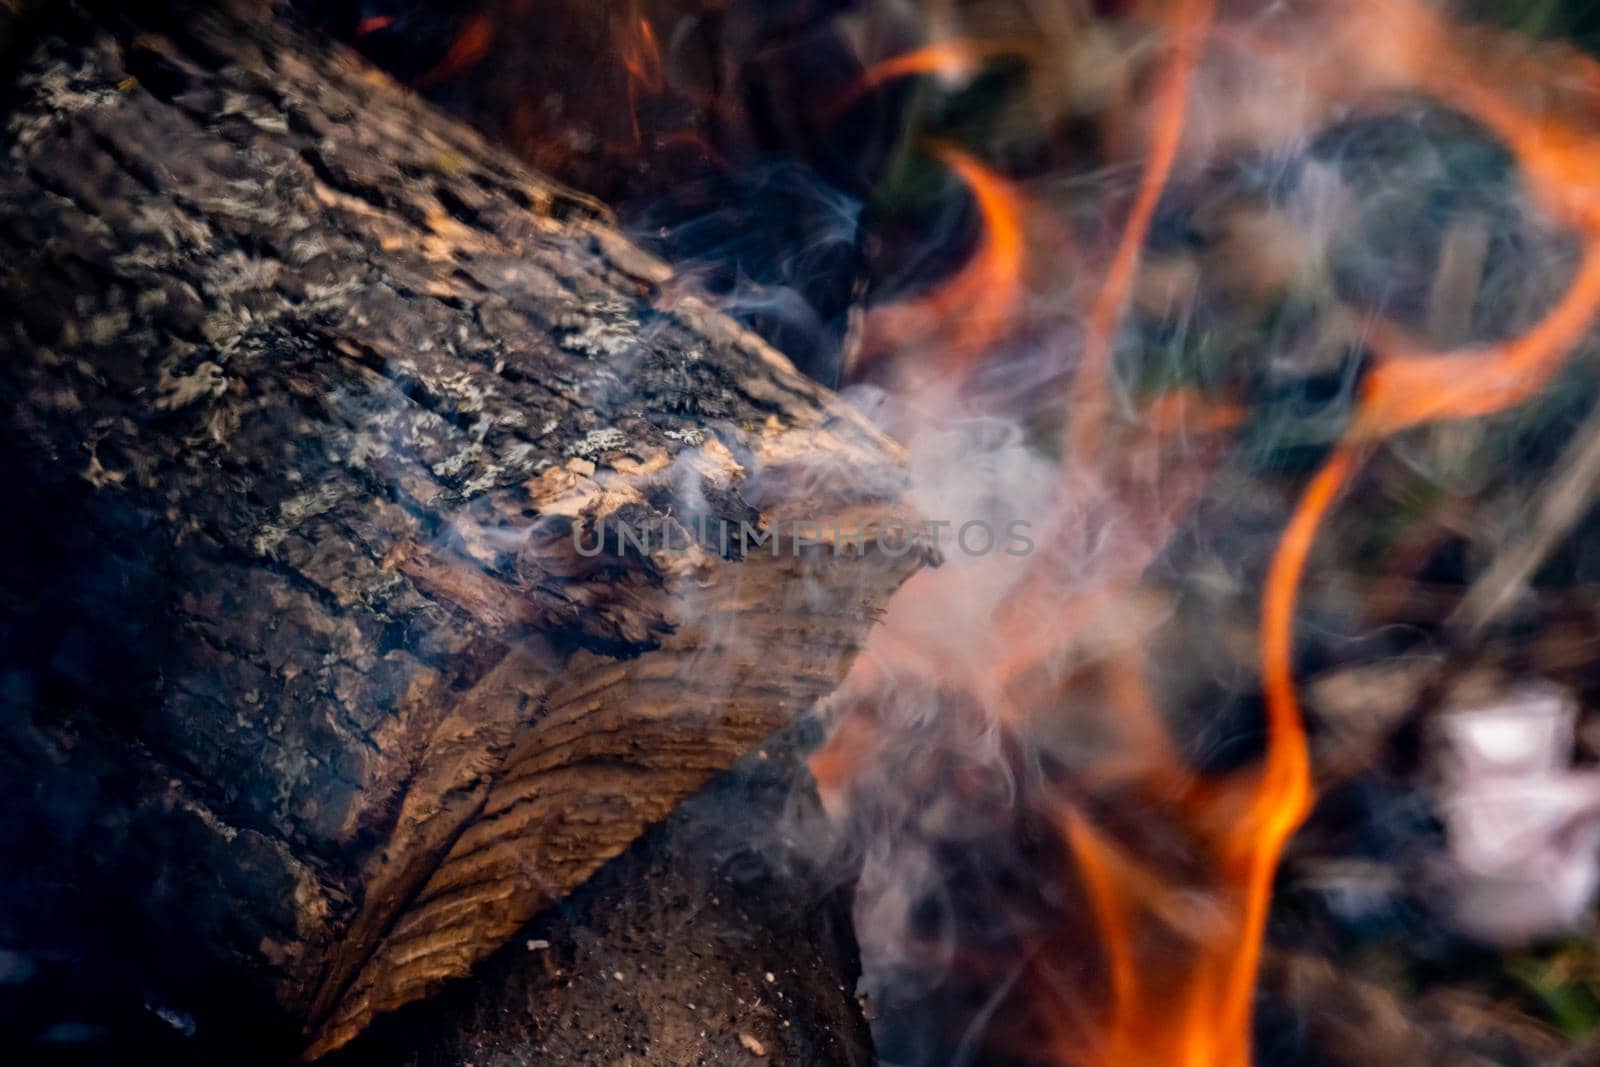 Smoke and burning wood close-up in outdoor campfire by colintemple